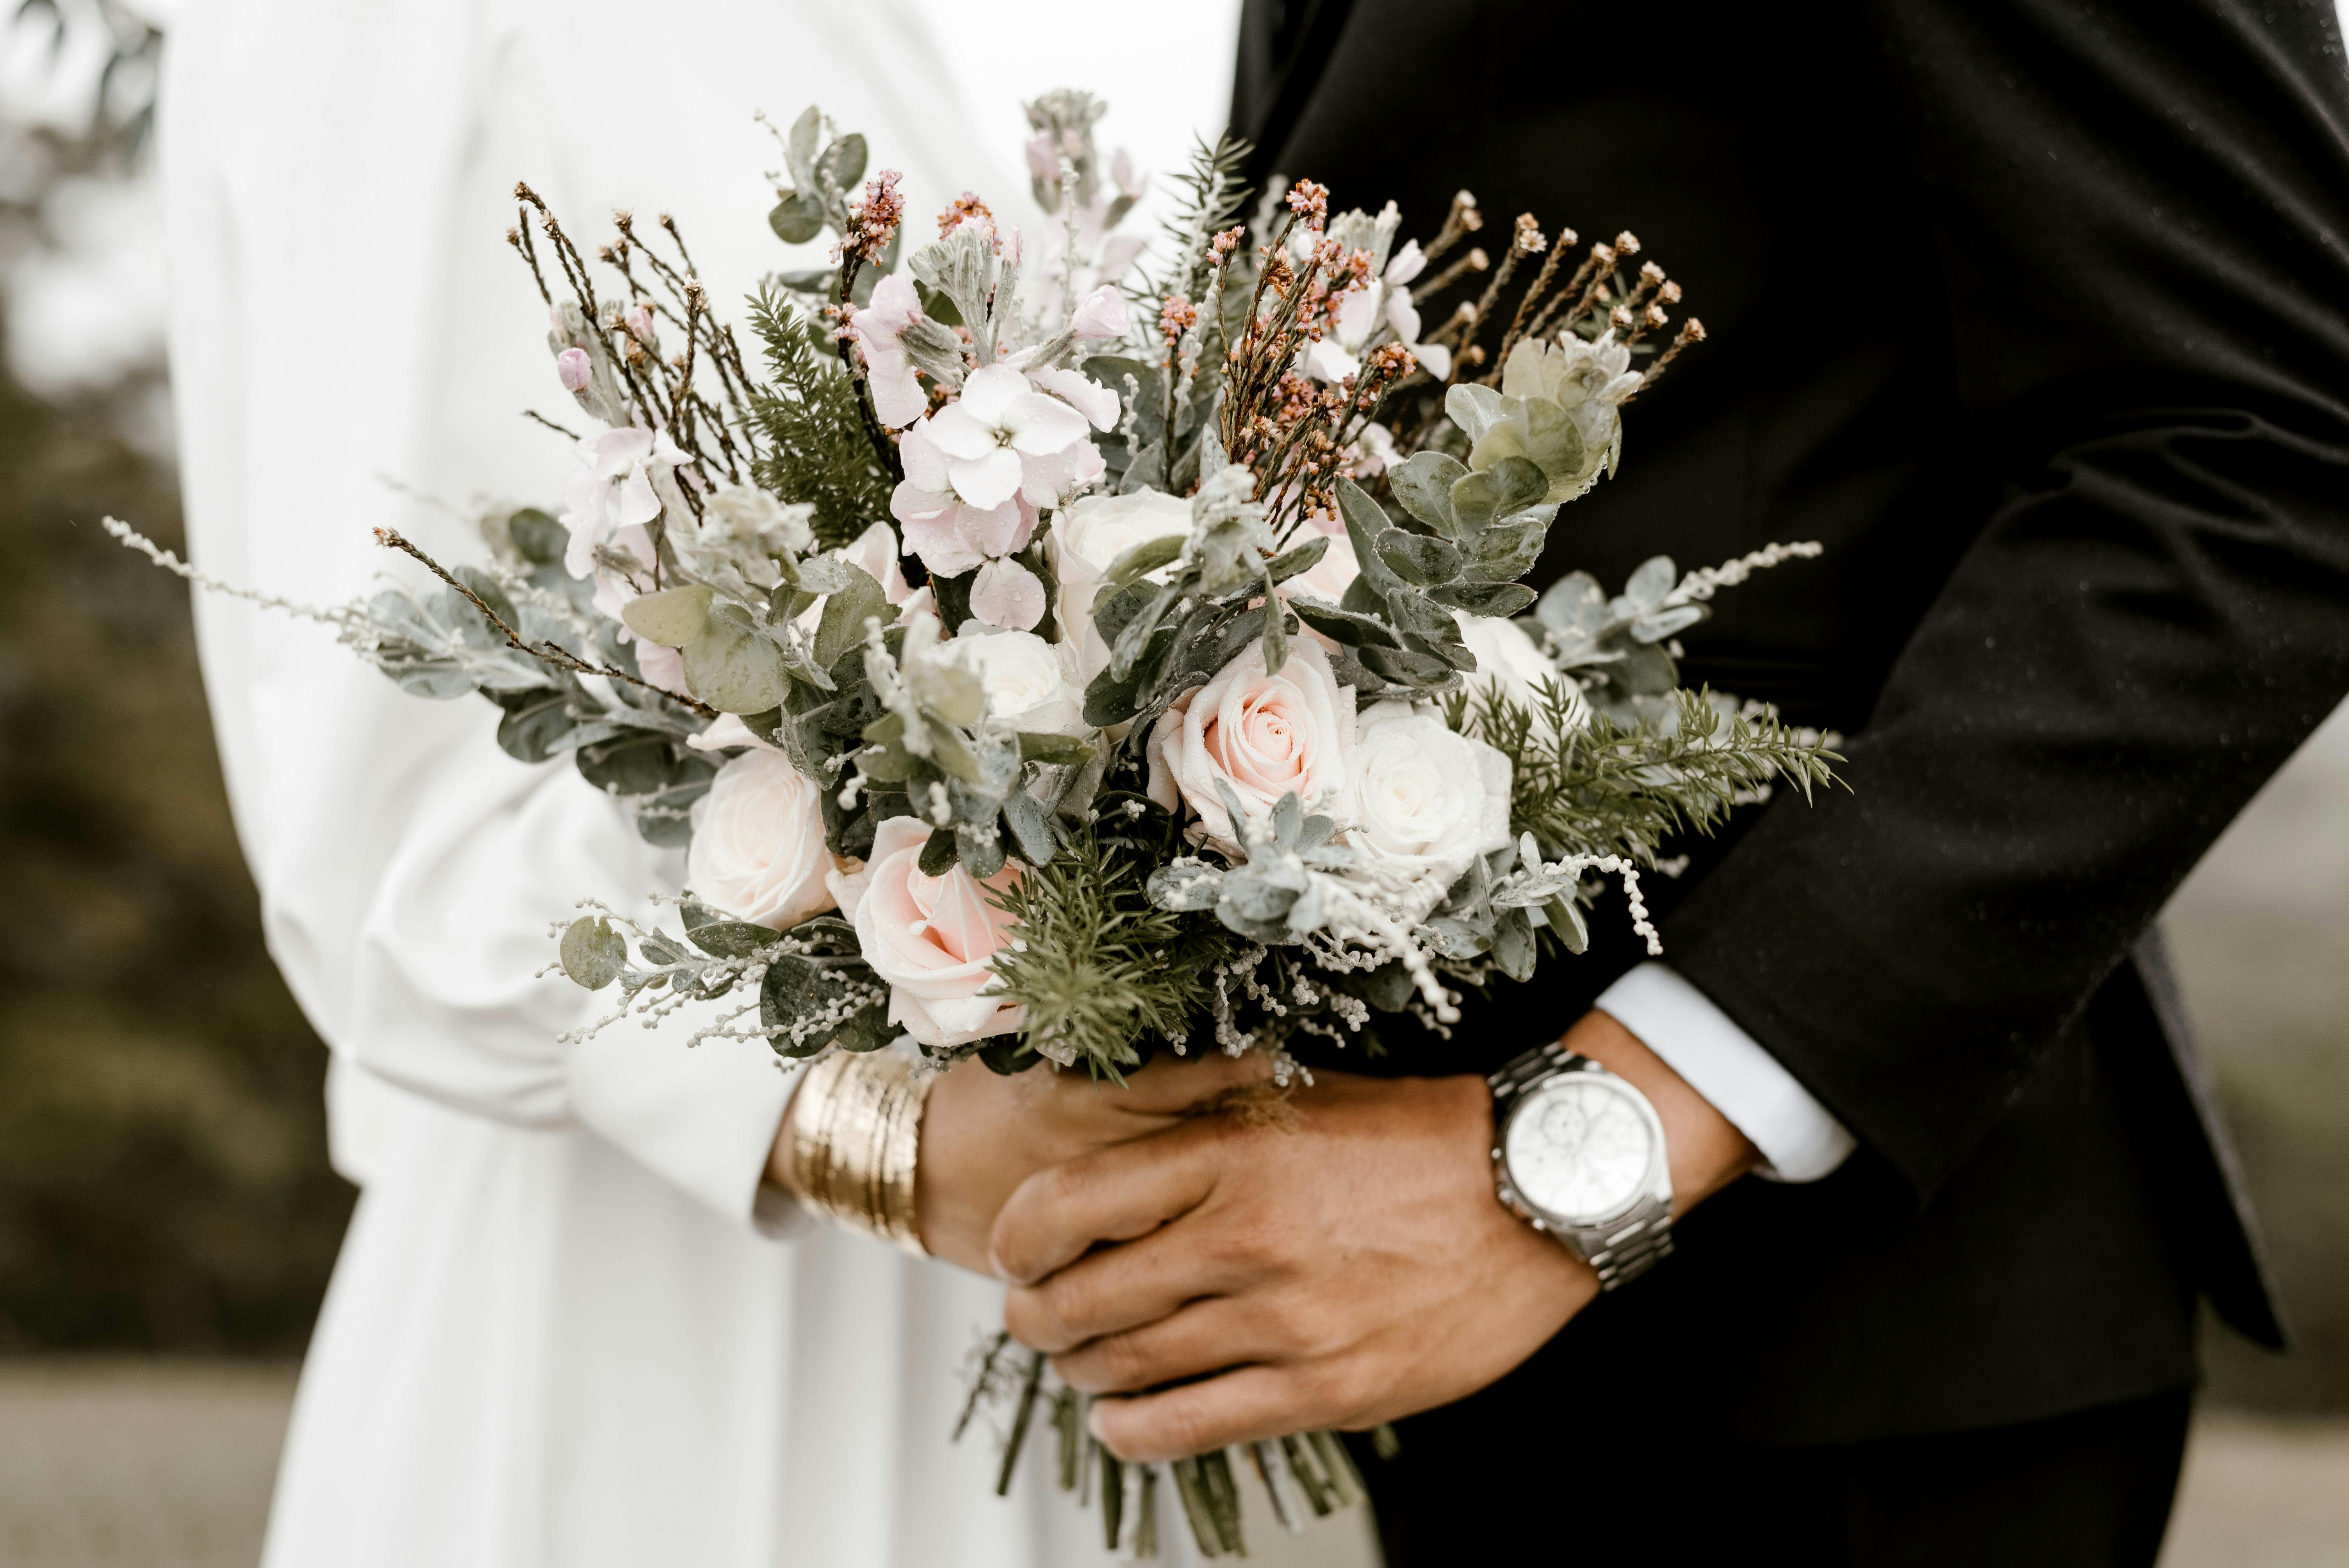 Bride and groom dancing with a wedding bouquet | Source: Pexels